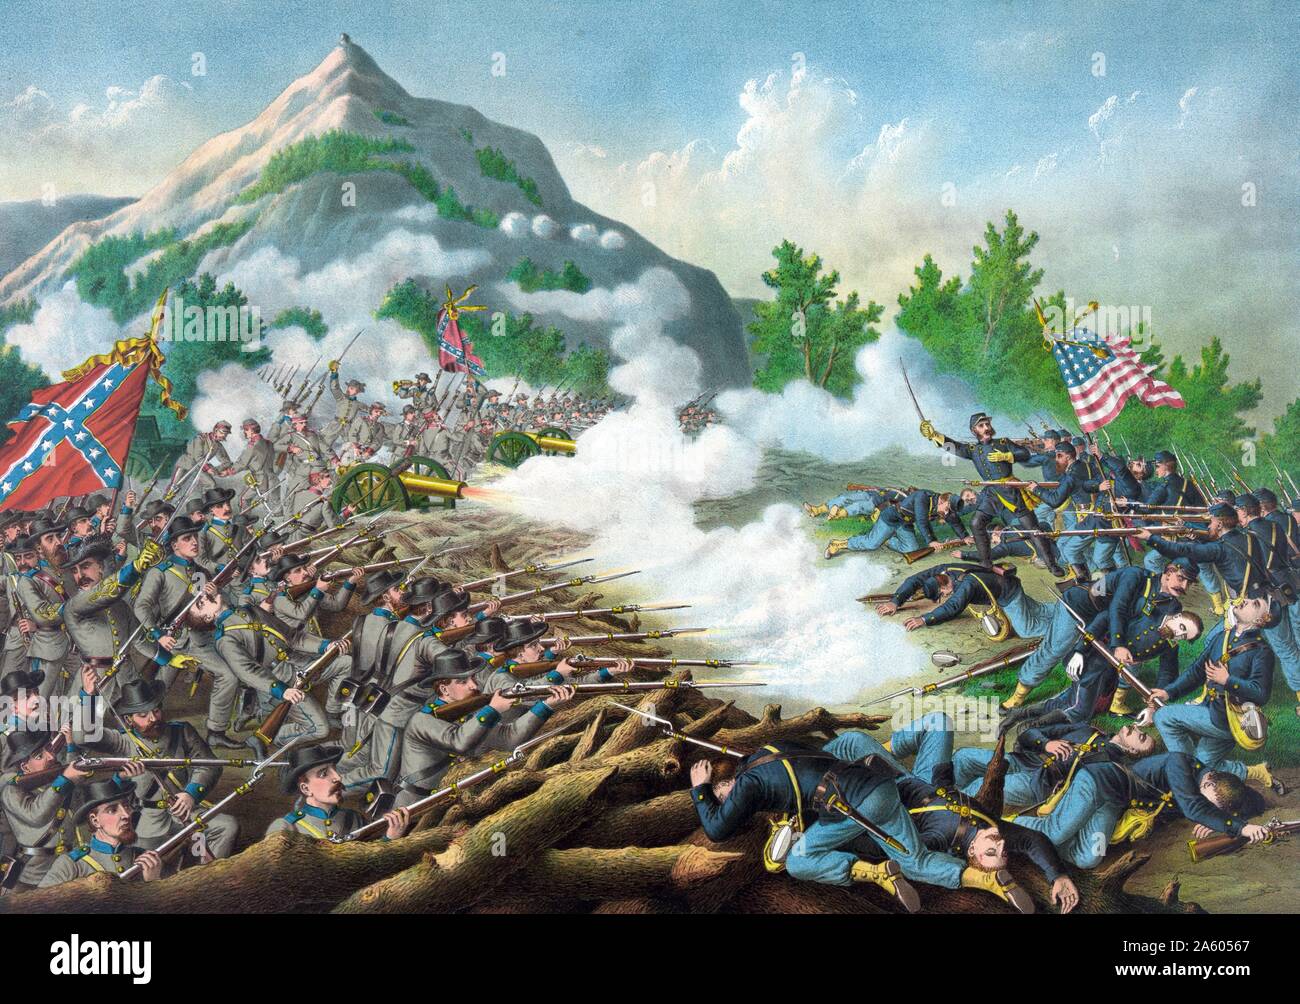 The American Civil war - The Battle of Kenesaw Mountain in 1864. It was the biggest frontal assault launch, started by the Union, against the Confederate army. Stock Photo